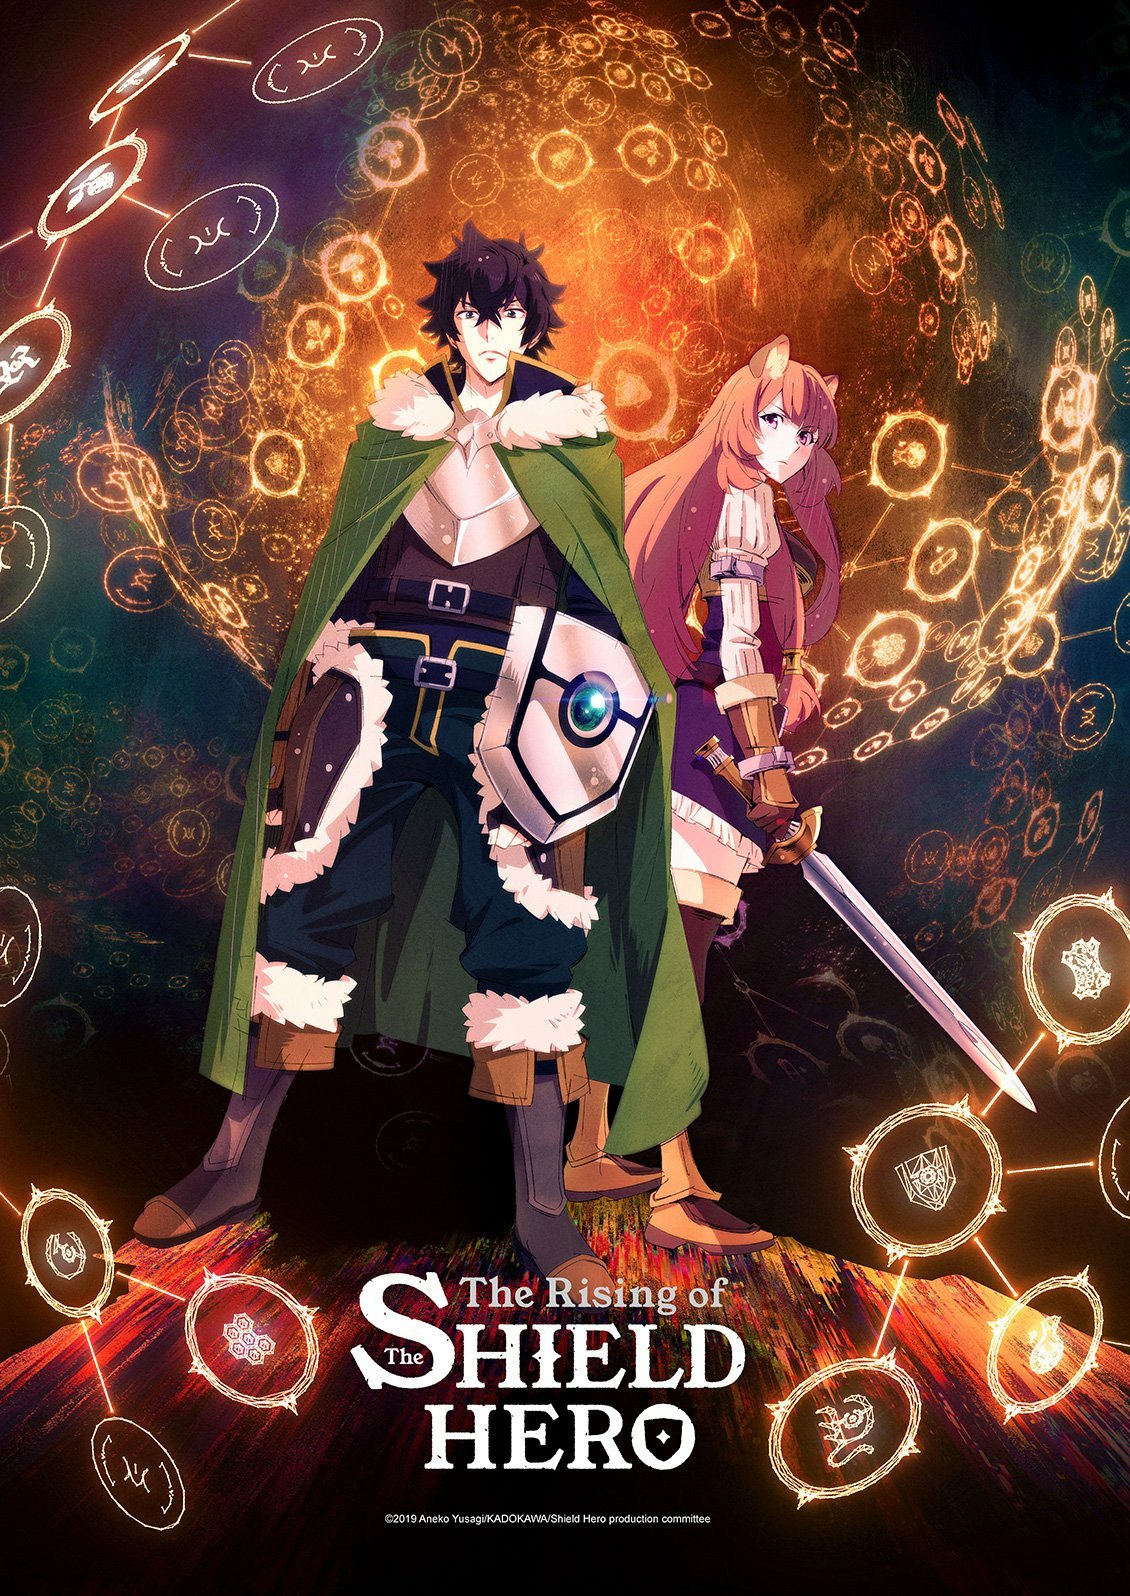 The Rising of the Shield Hero Season 1 Anime Limited Editions & UK Home Video Details Revealed